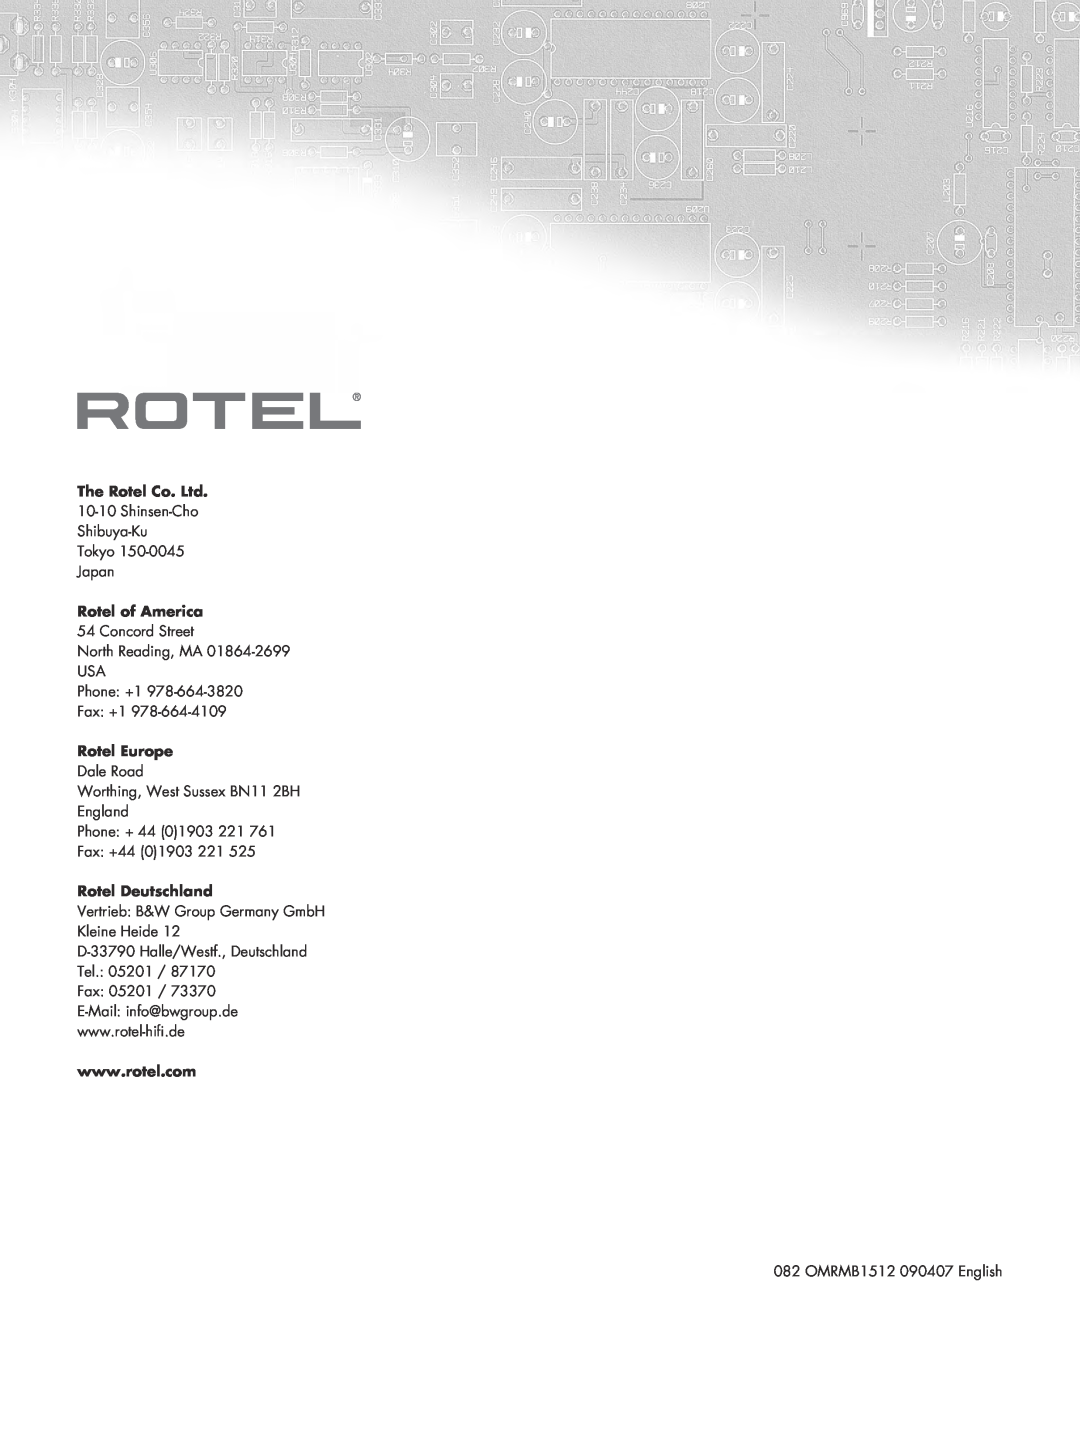 Rotel RC-1580 owner manual Rotel of America, Rotel Europe, Rotel Deutschland 